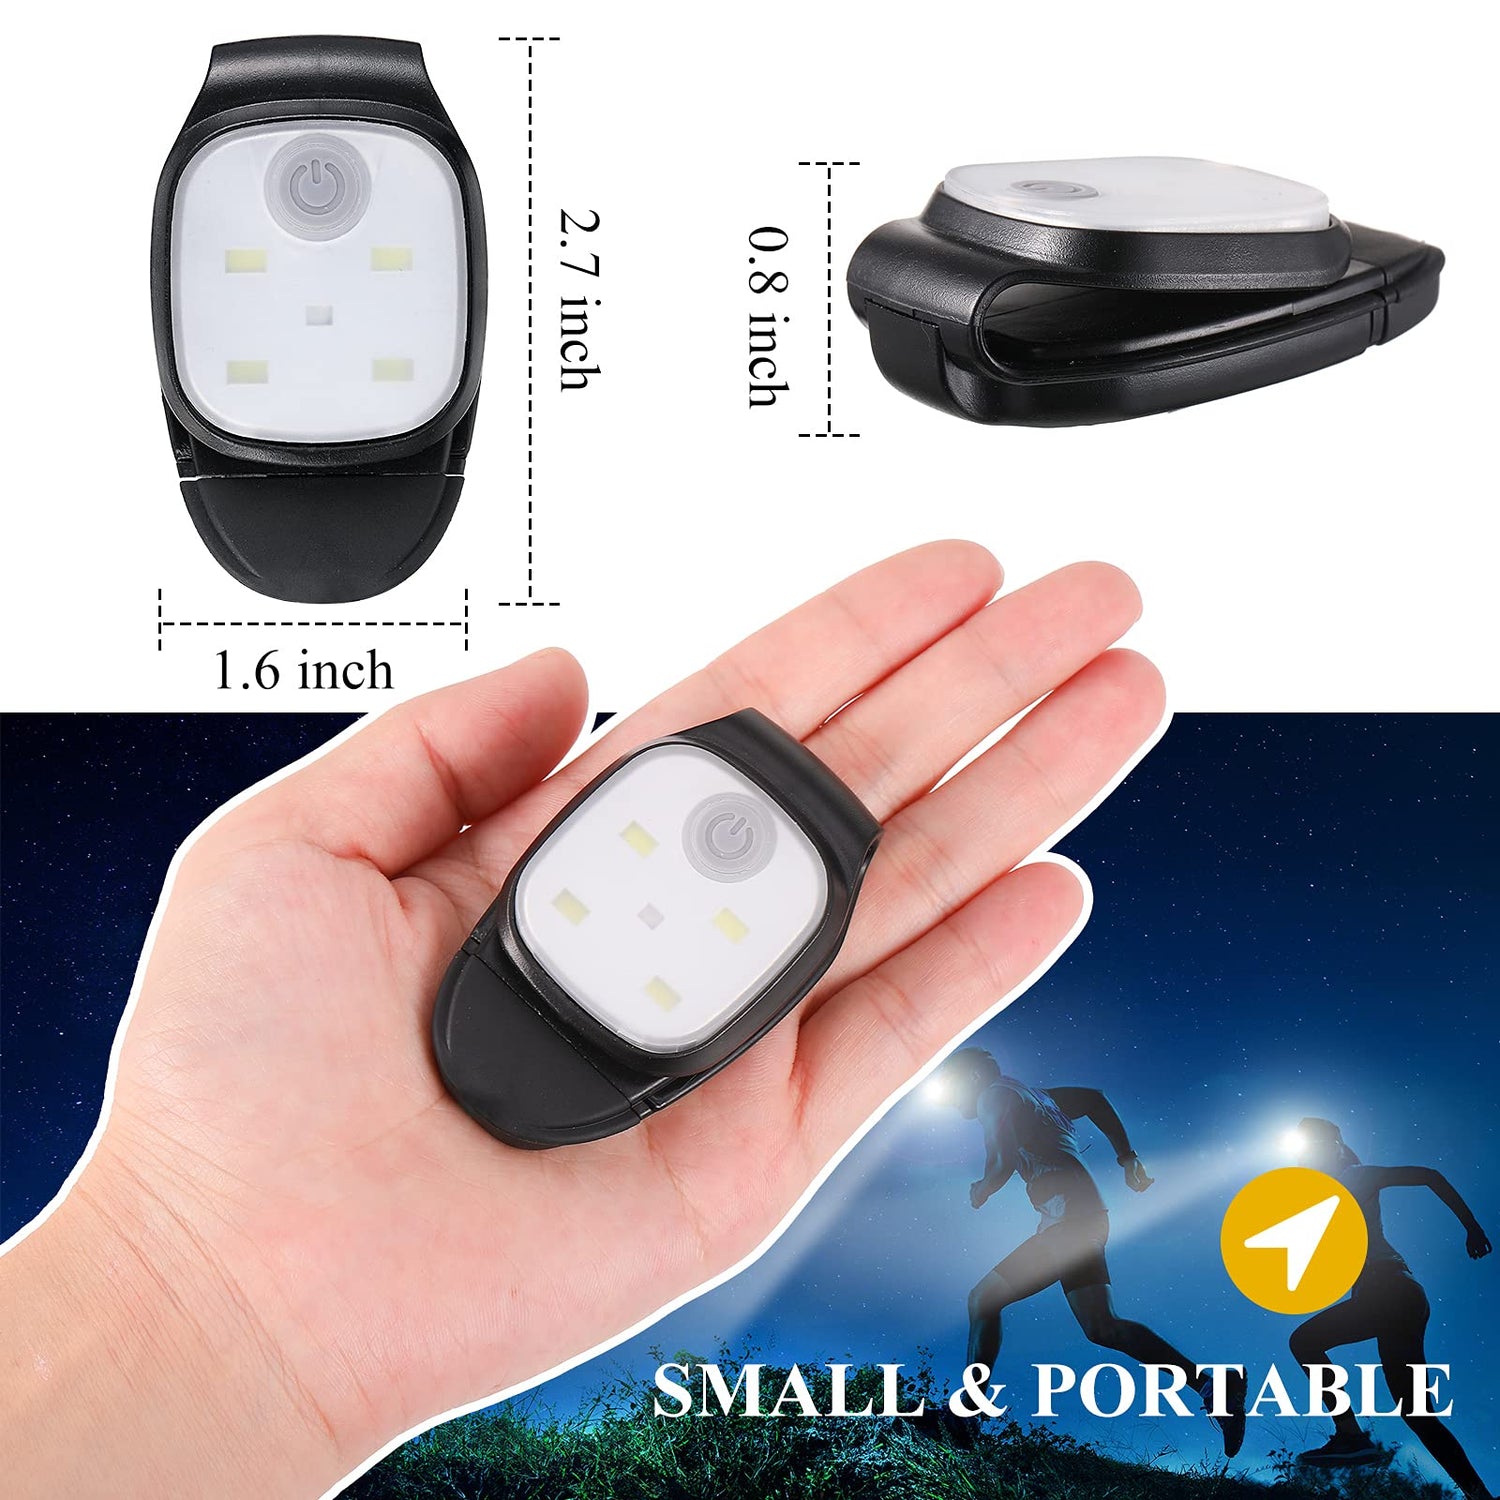 Rechargeable LED Retractable Reel Badge Light – Nurse Chill